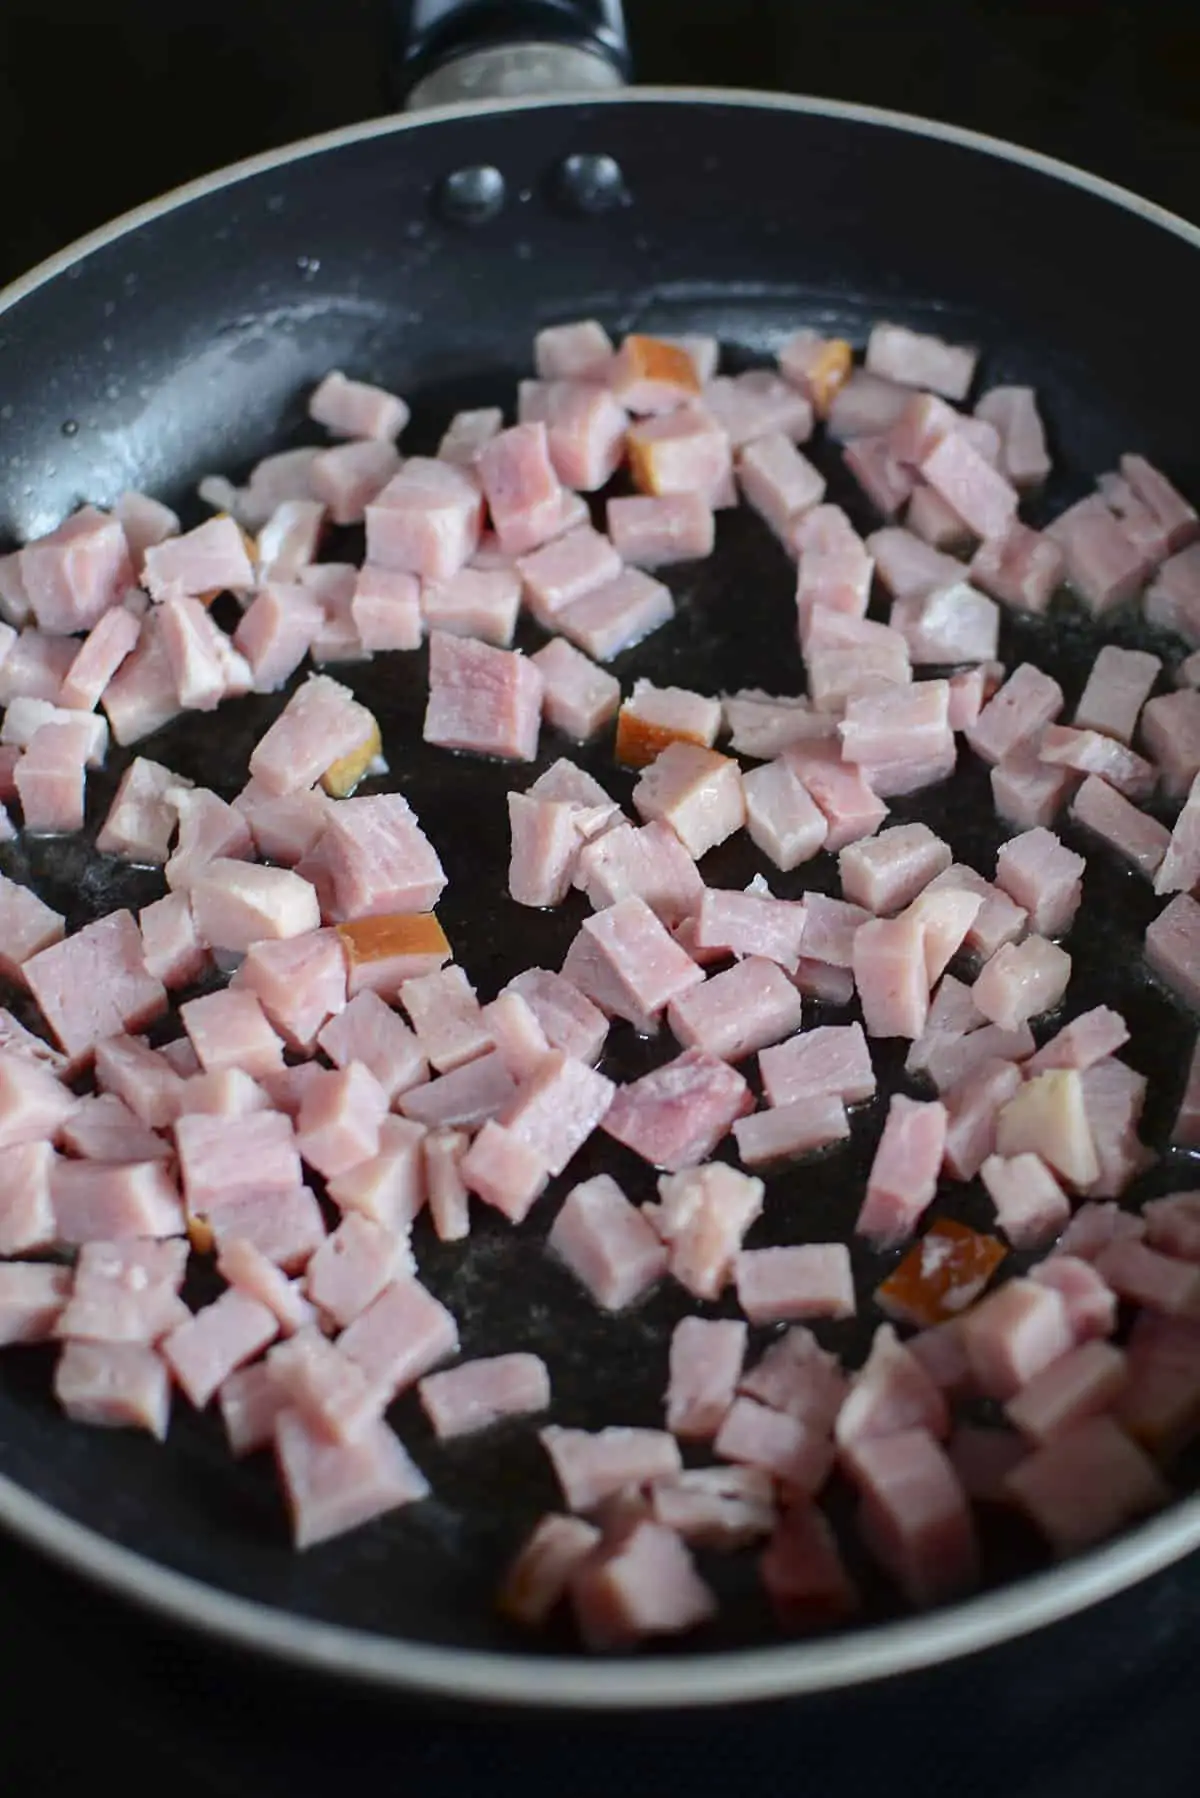 Sauteing the diced ham in a skillet.